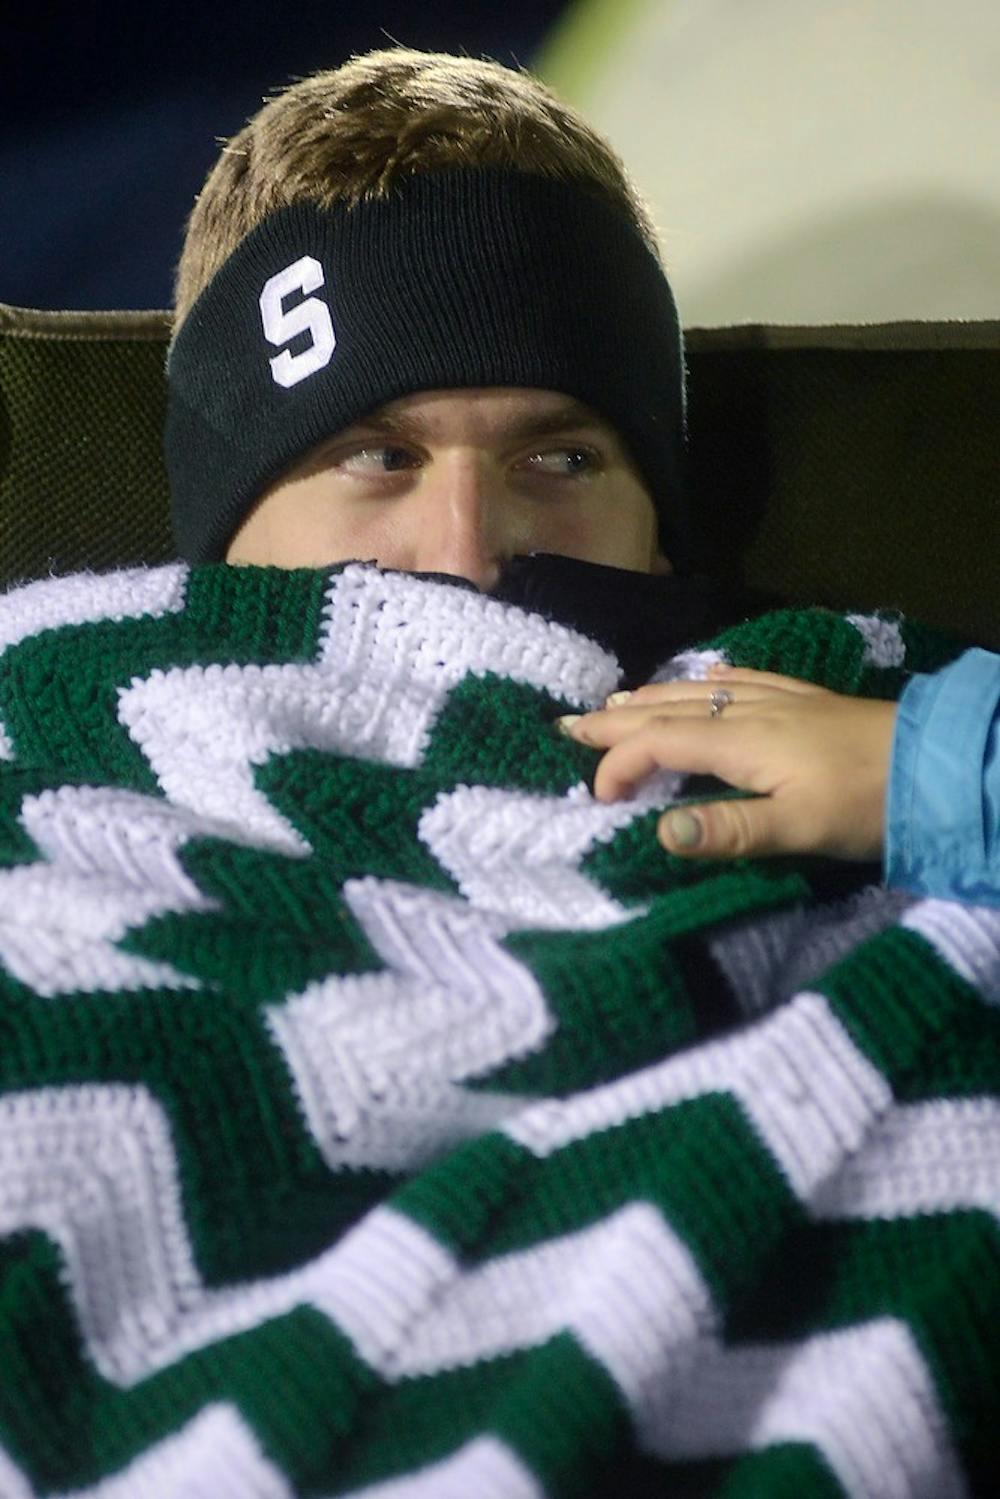 <p>Finance junior Patrick Price glares at child development junior Ashley Beyer as she tries to lower his blanket Oct. 17, 2014, during the Izzone Campout at Munn Field. Hundreds of students battled the cold and rain to sleep outdoors overnight in hopes of getting lower bowl seating. Julia Nagy/The State News</p>